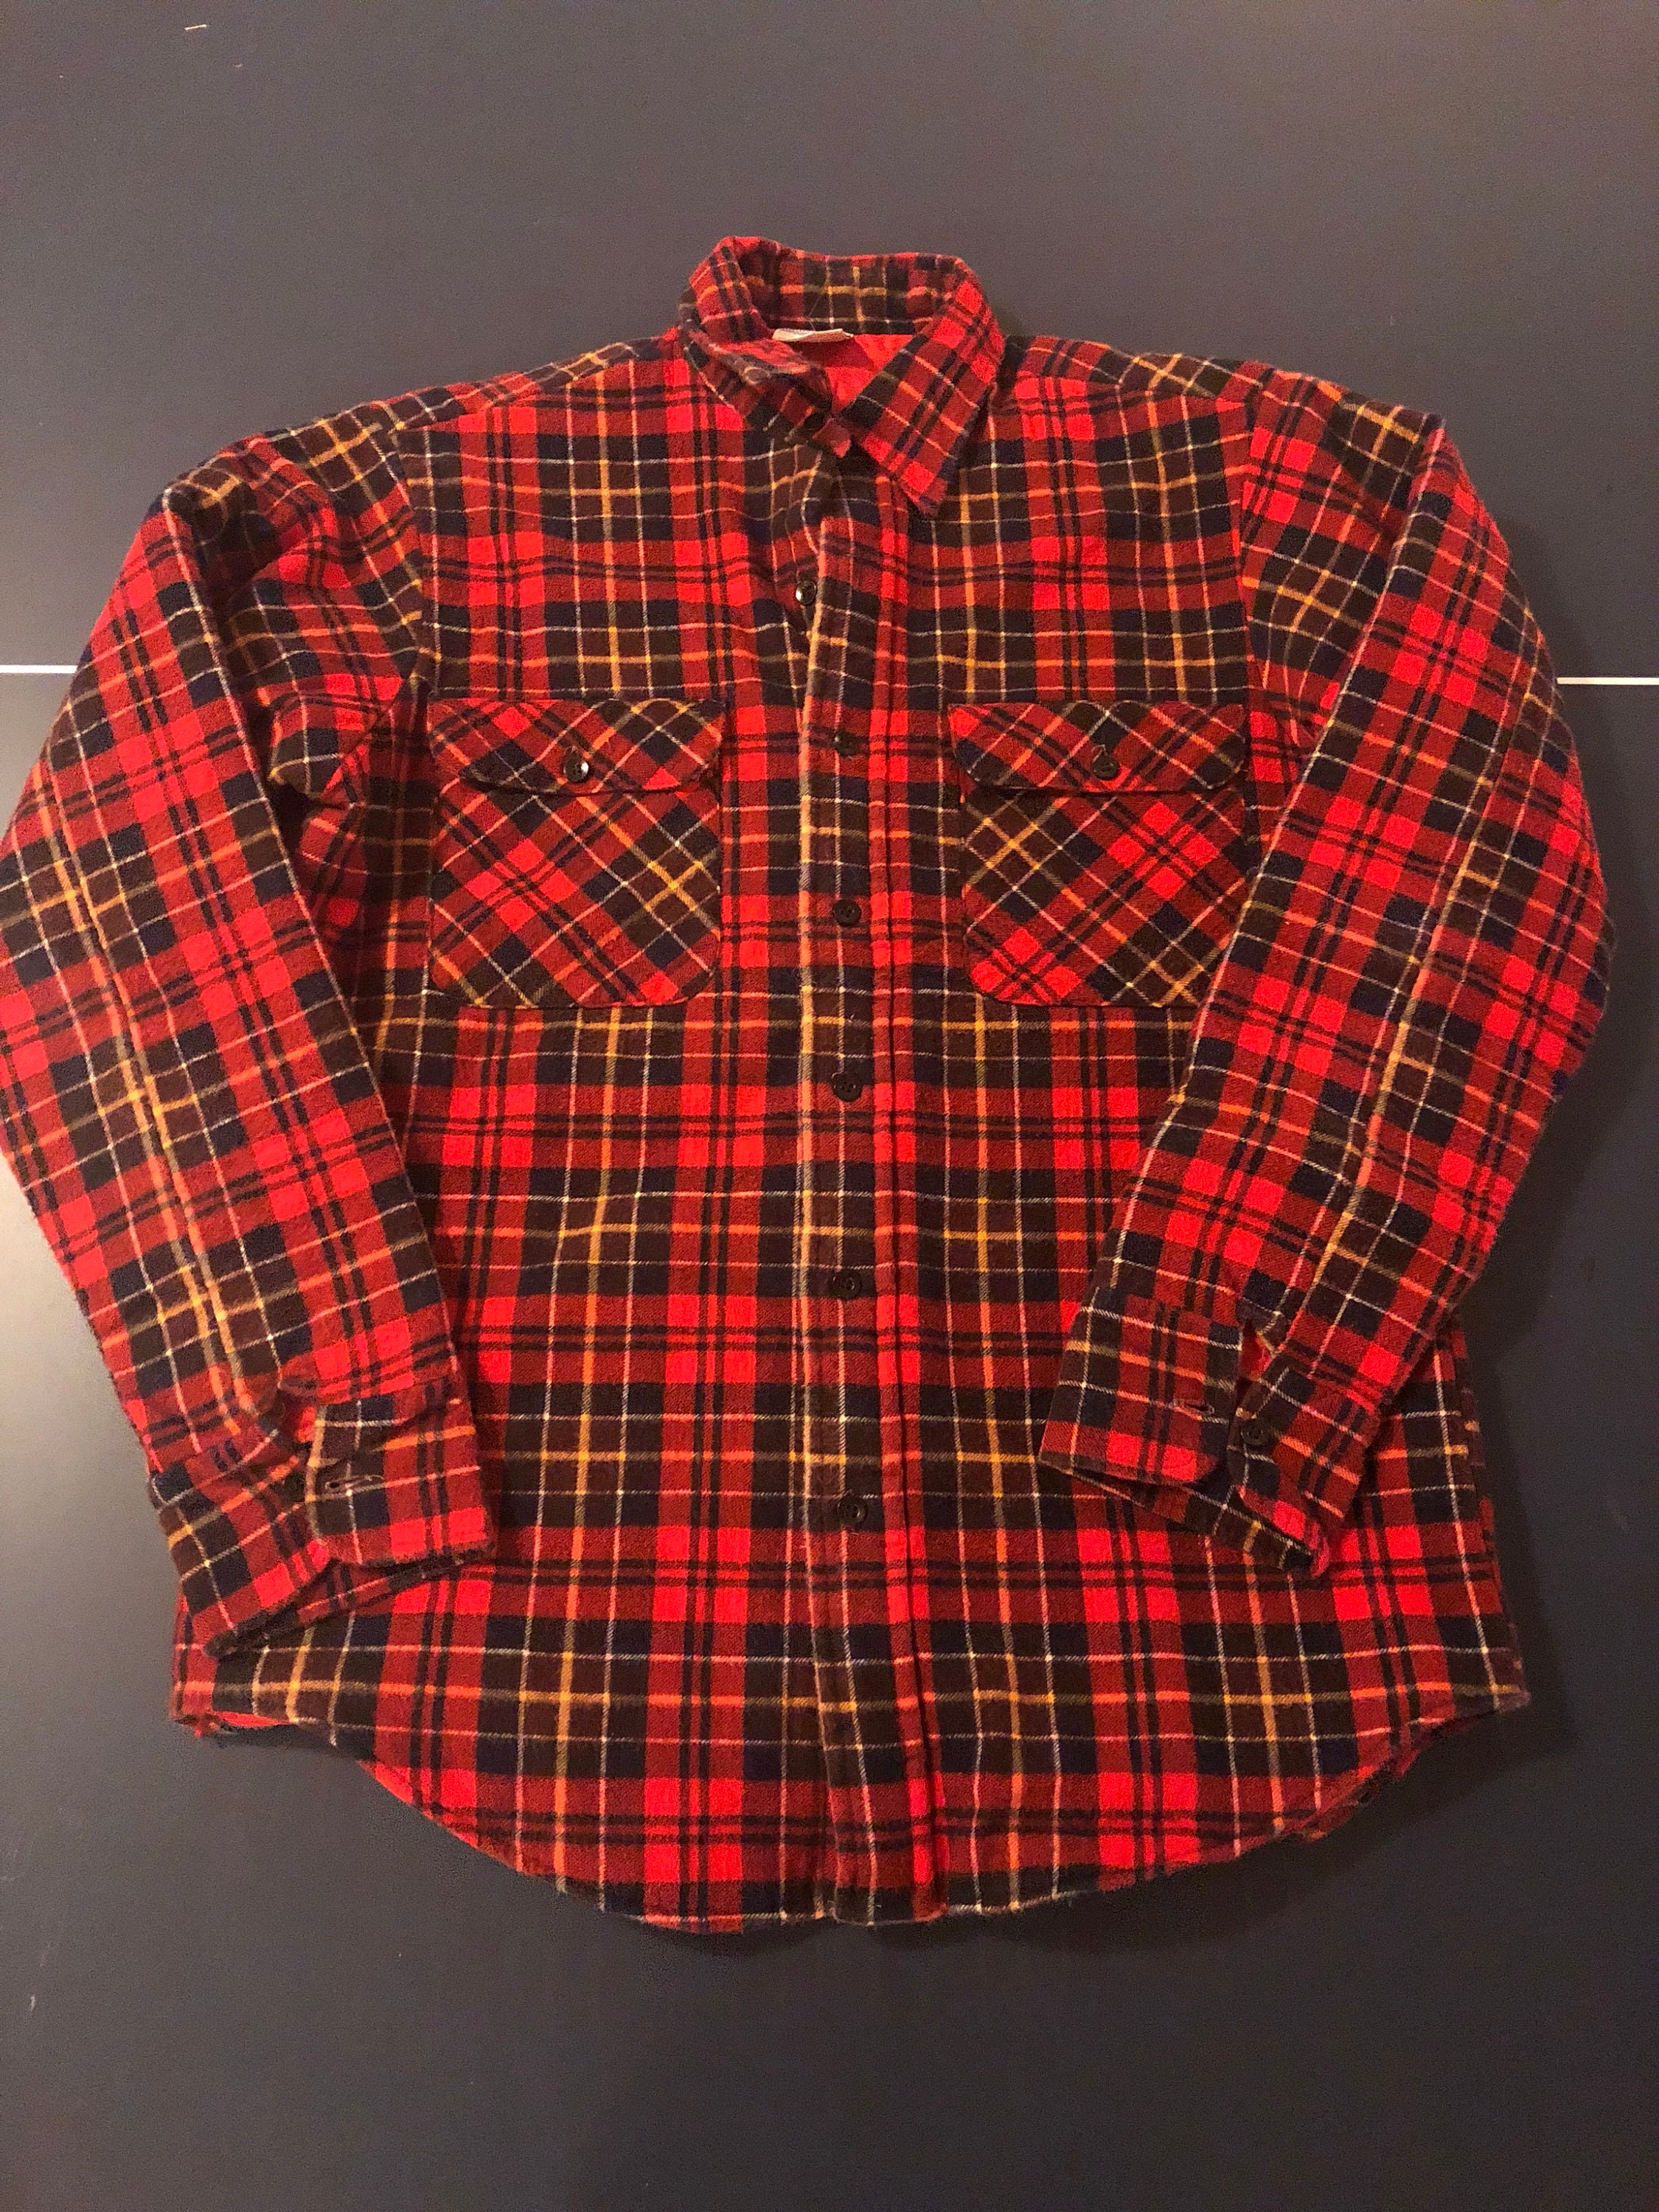 Vintage 70/80s Across the Land Red Flannel Button Down | Etsy